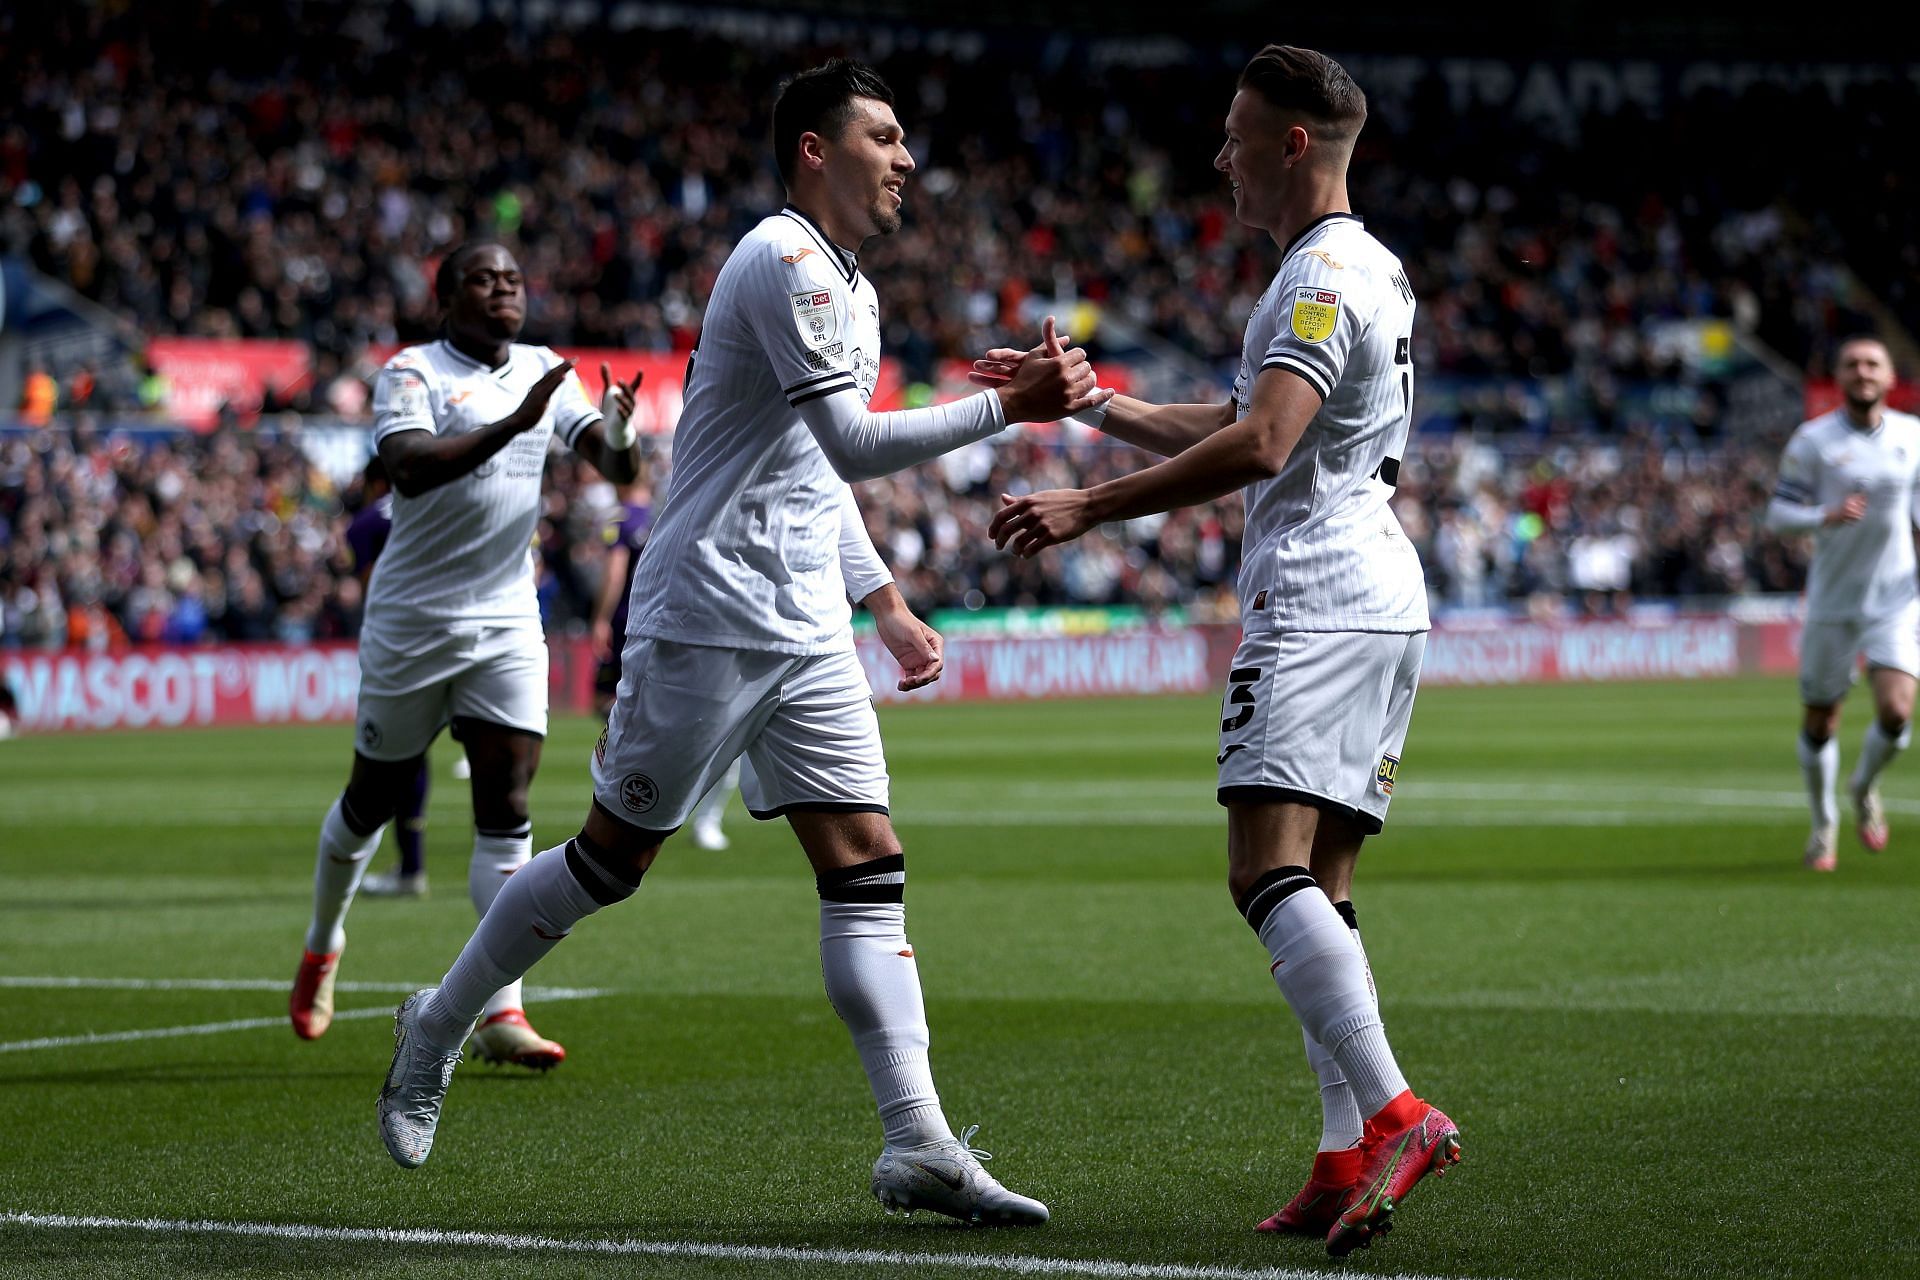 Swansea City will host Middlesbrough on Saturday.